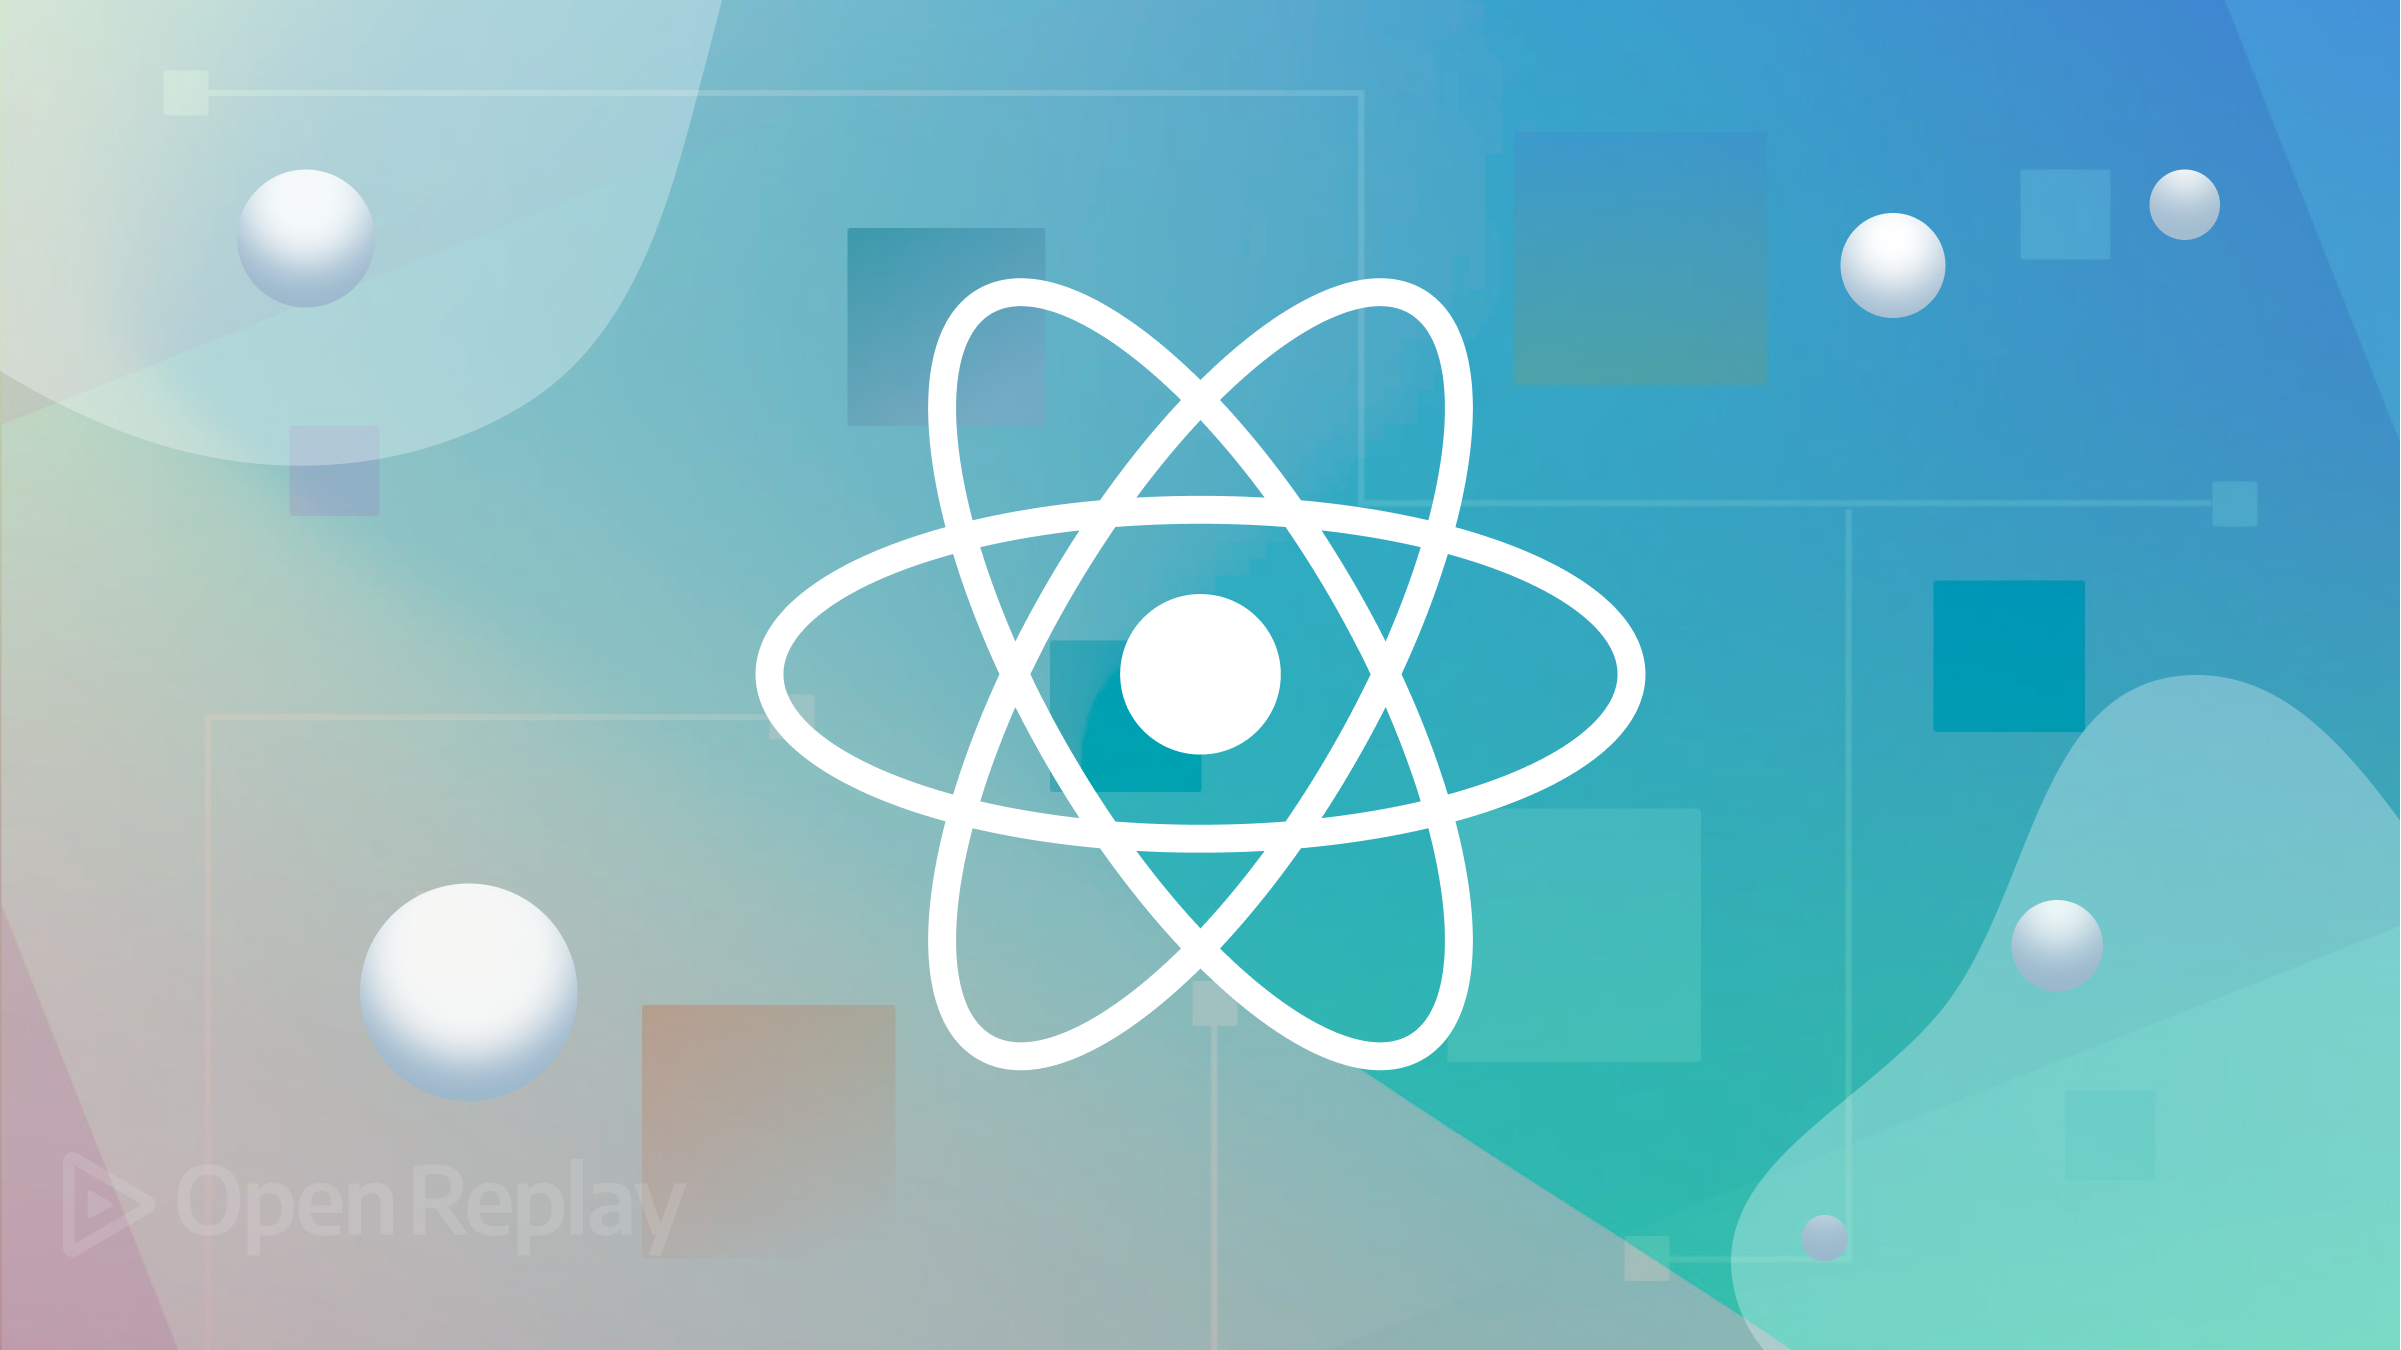 An Introduction to React Portals